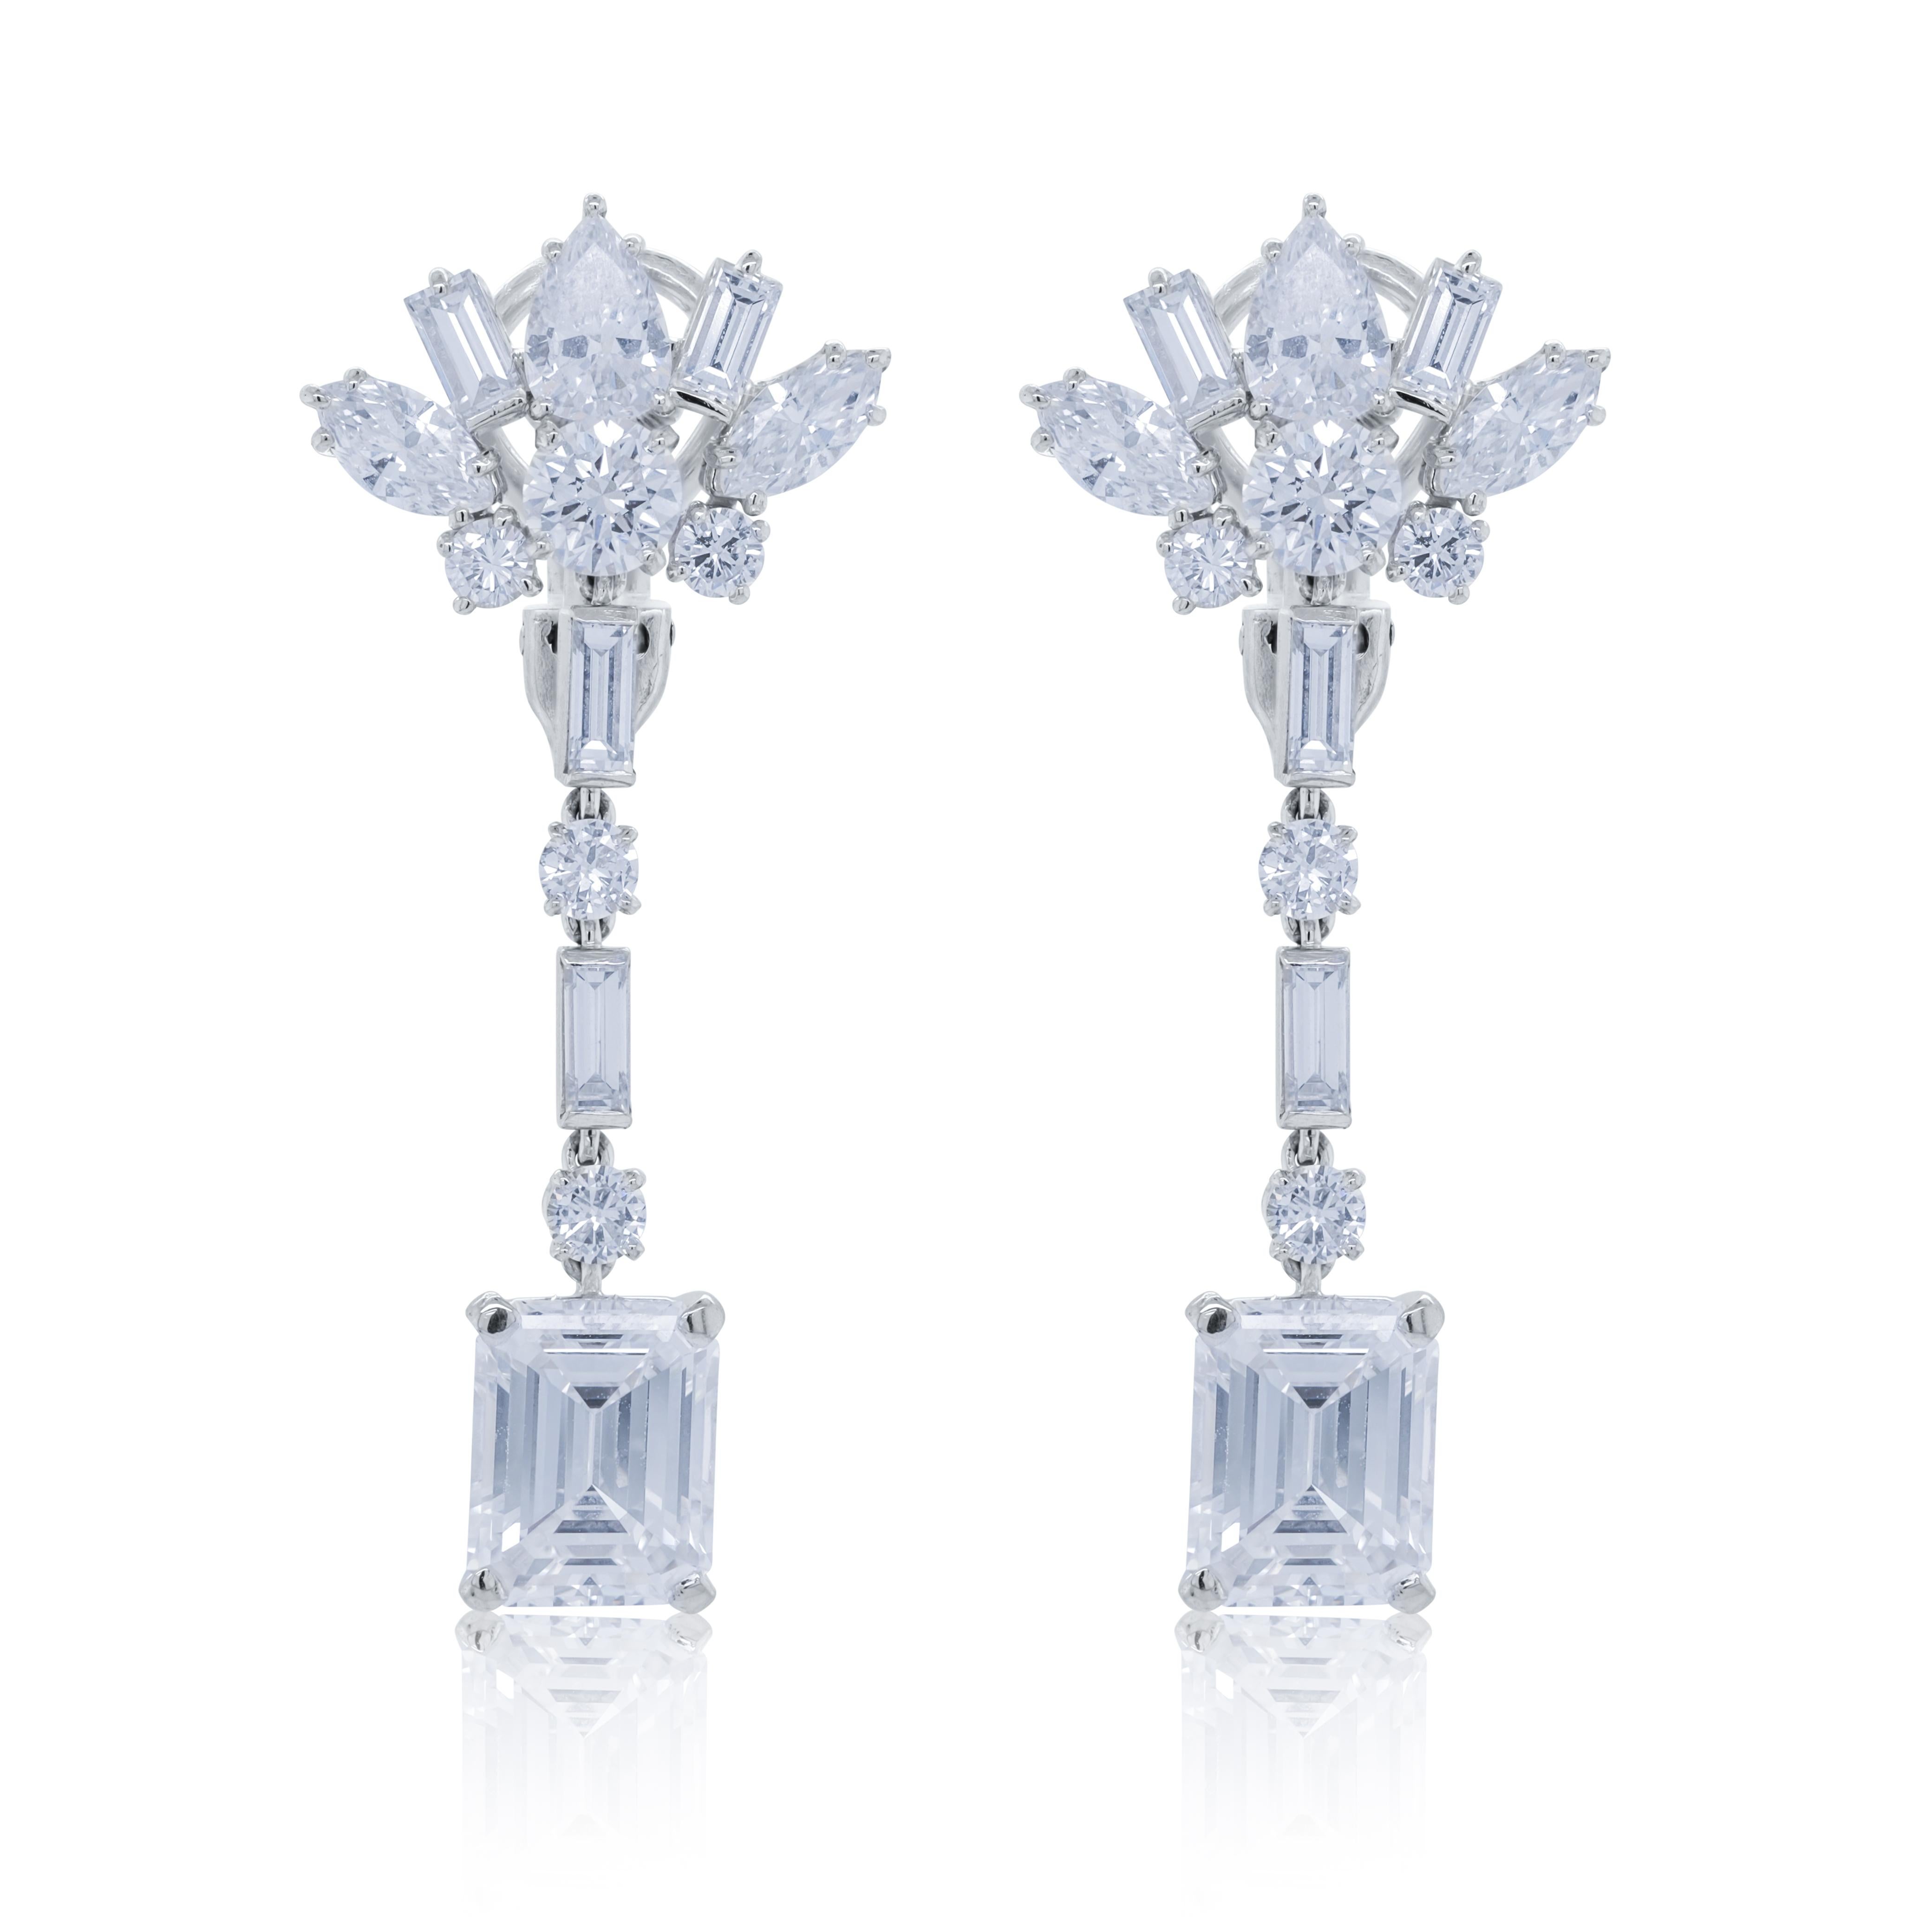 Modern Diana M. PLATINUM EARRINGS  SET WITH GIA DIAMONDS 2.47CT E VVS2 AND 2.63 F IF For Sale